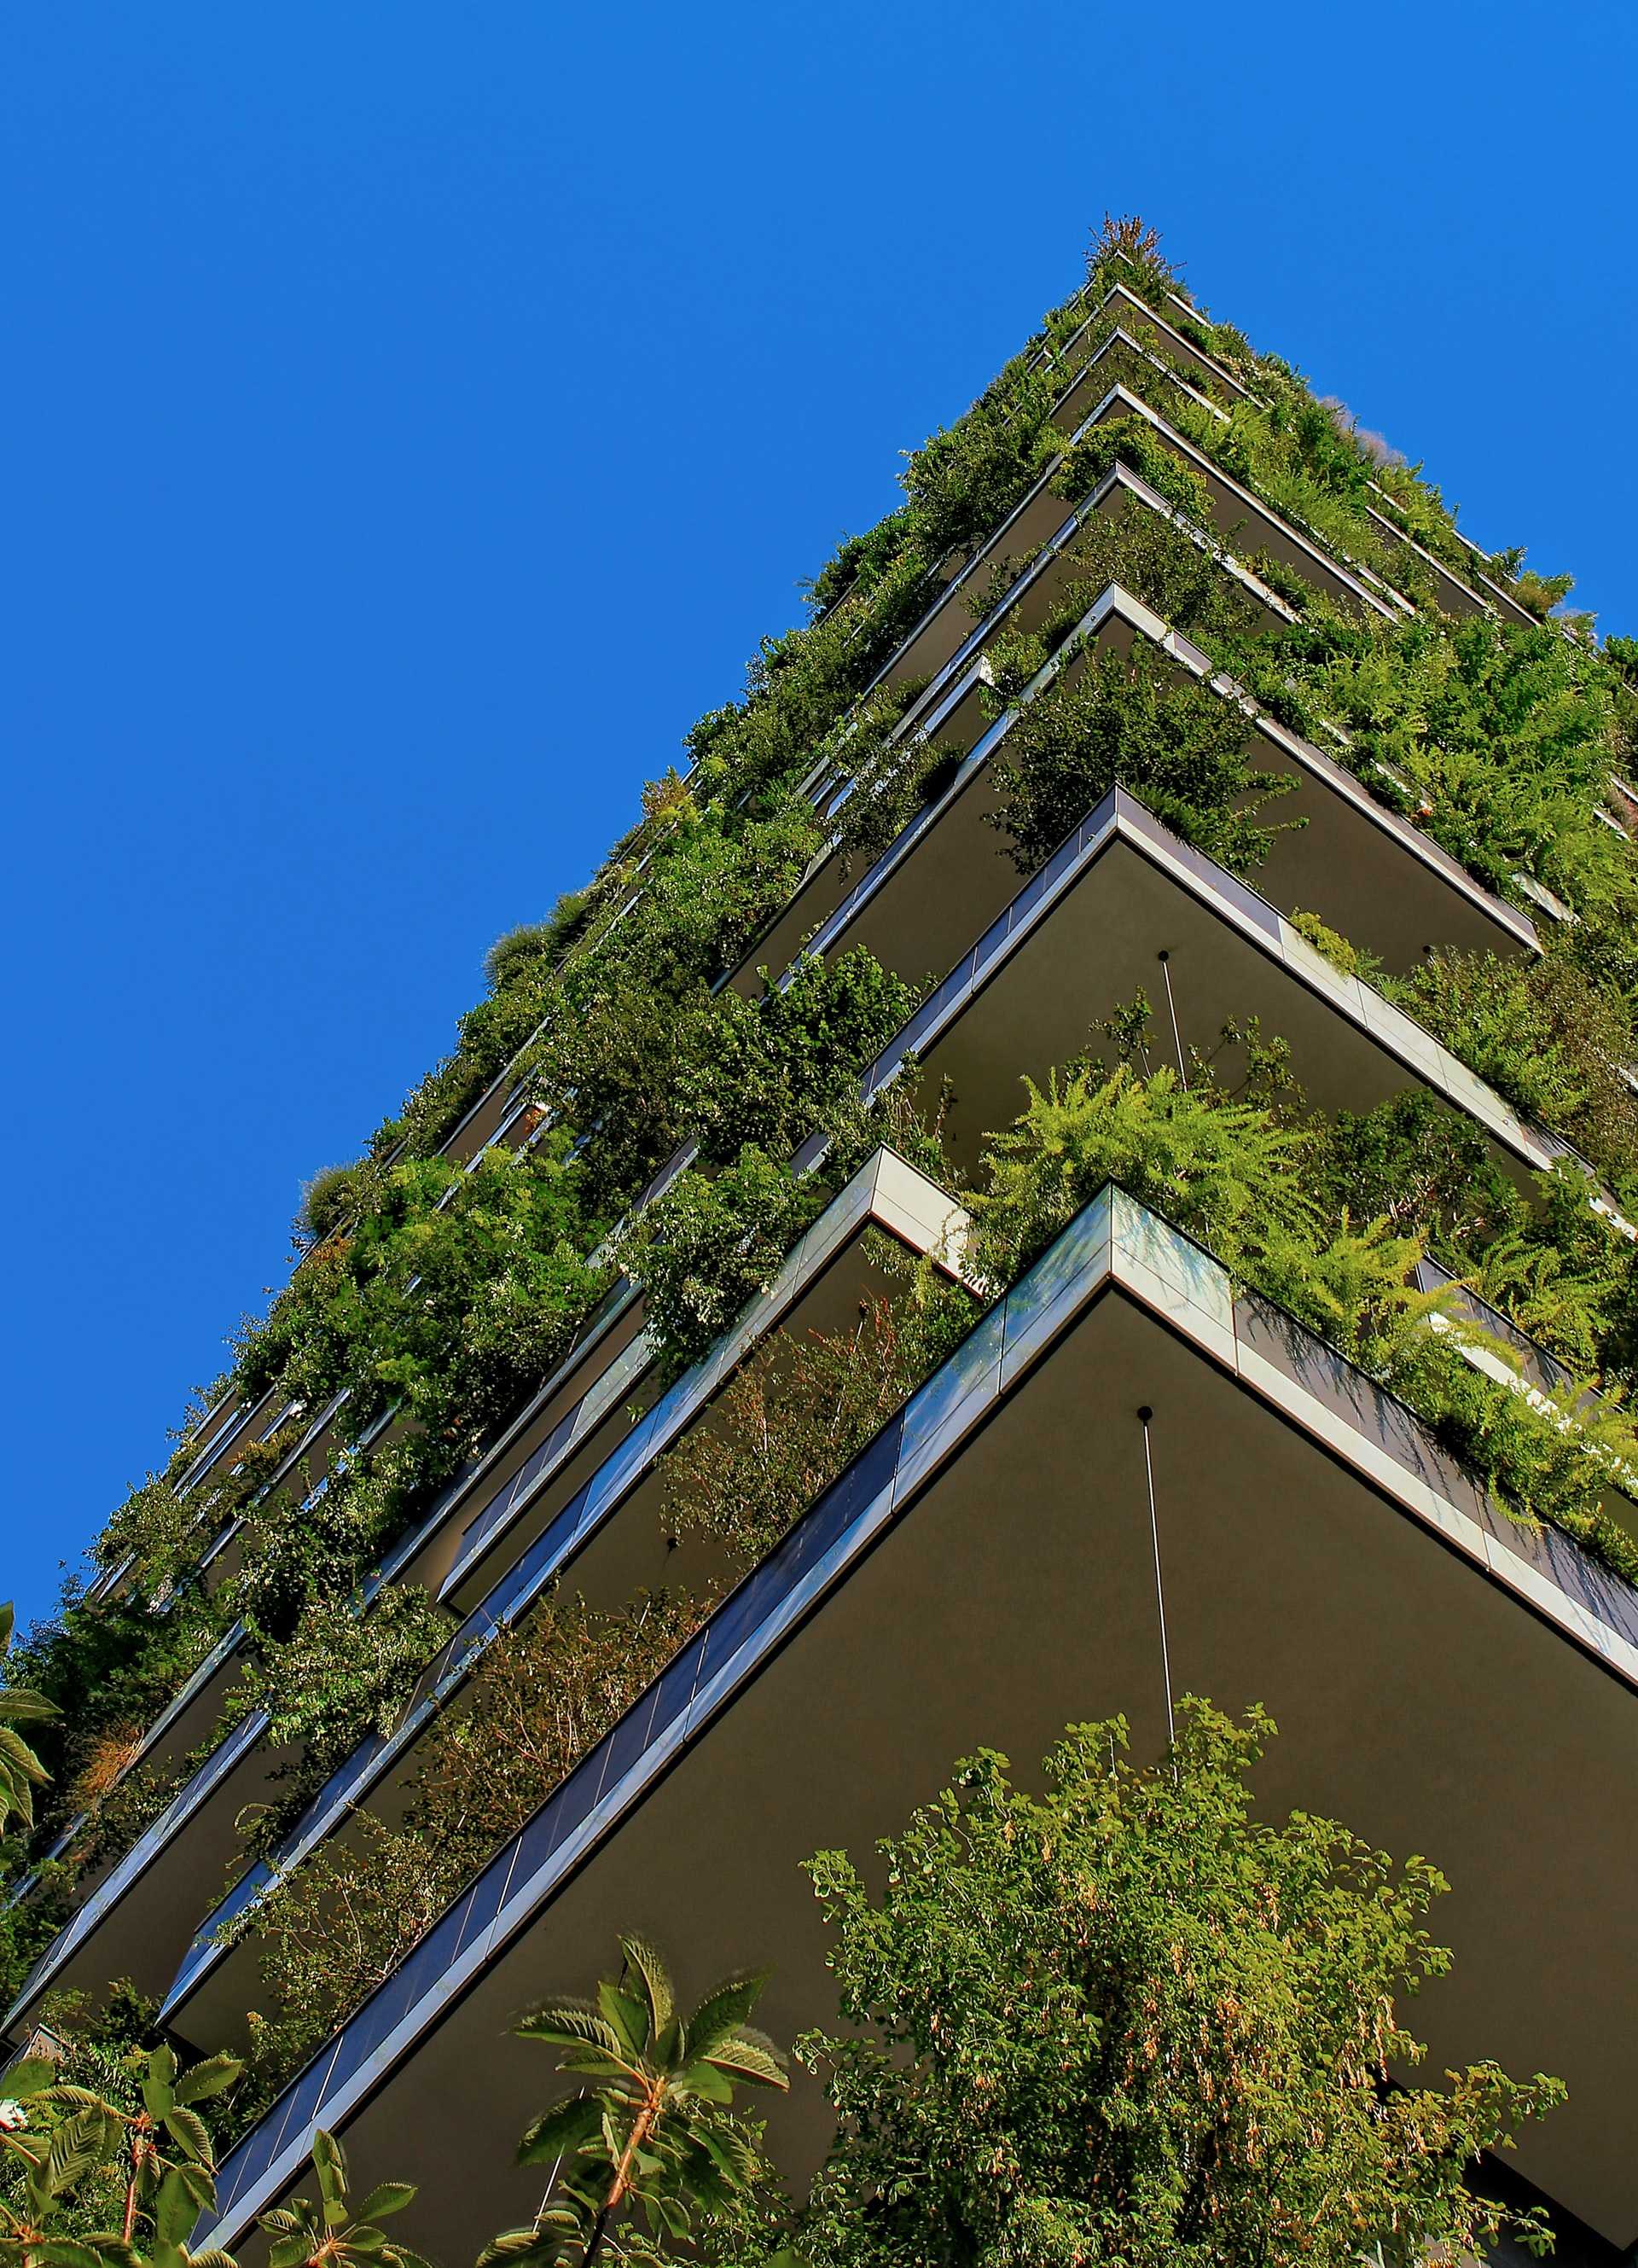 A high-rise building with plantings spilling down from balconies.